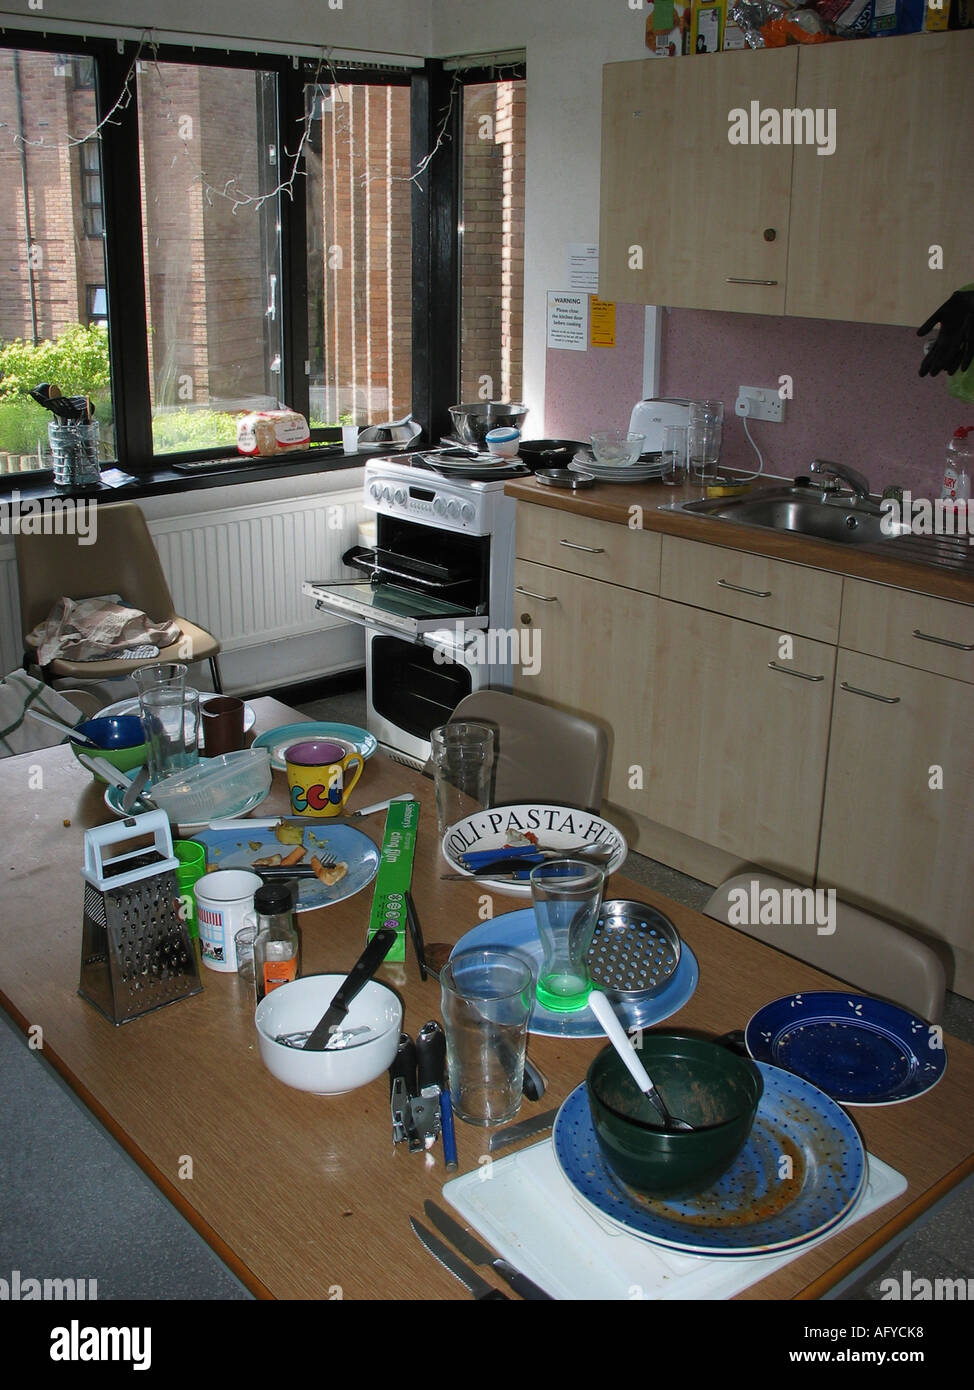 Table in Kitchen of Student Flat with dirty dishes left out Stock Photo